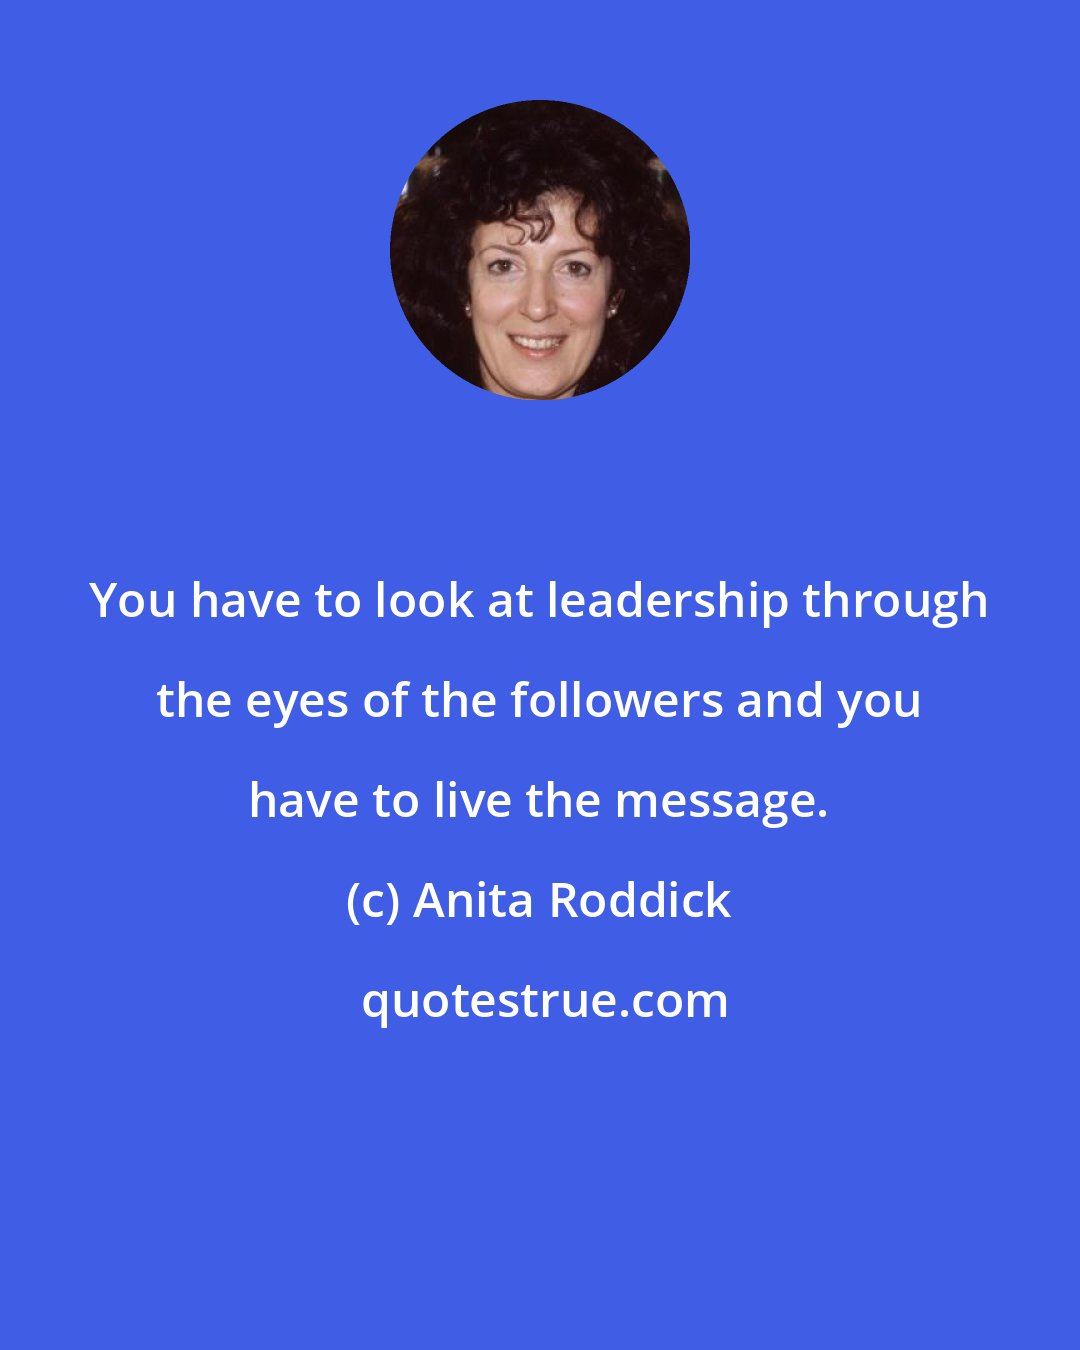 Anita Roddick: You have to look at leadership through the eyes of the followers and you have to live the message.